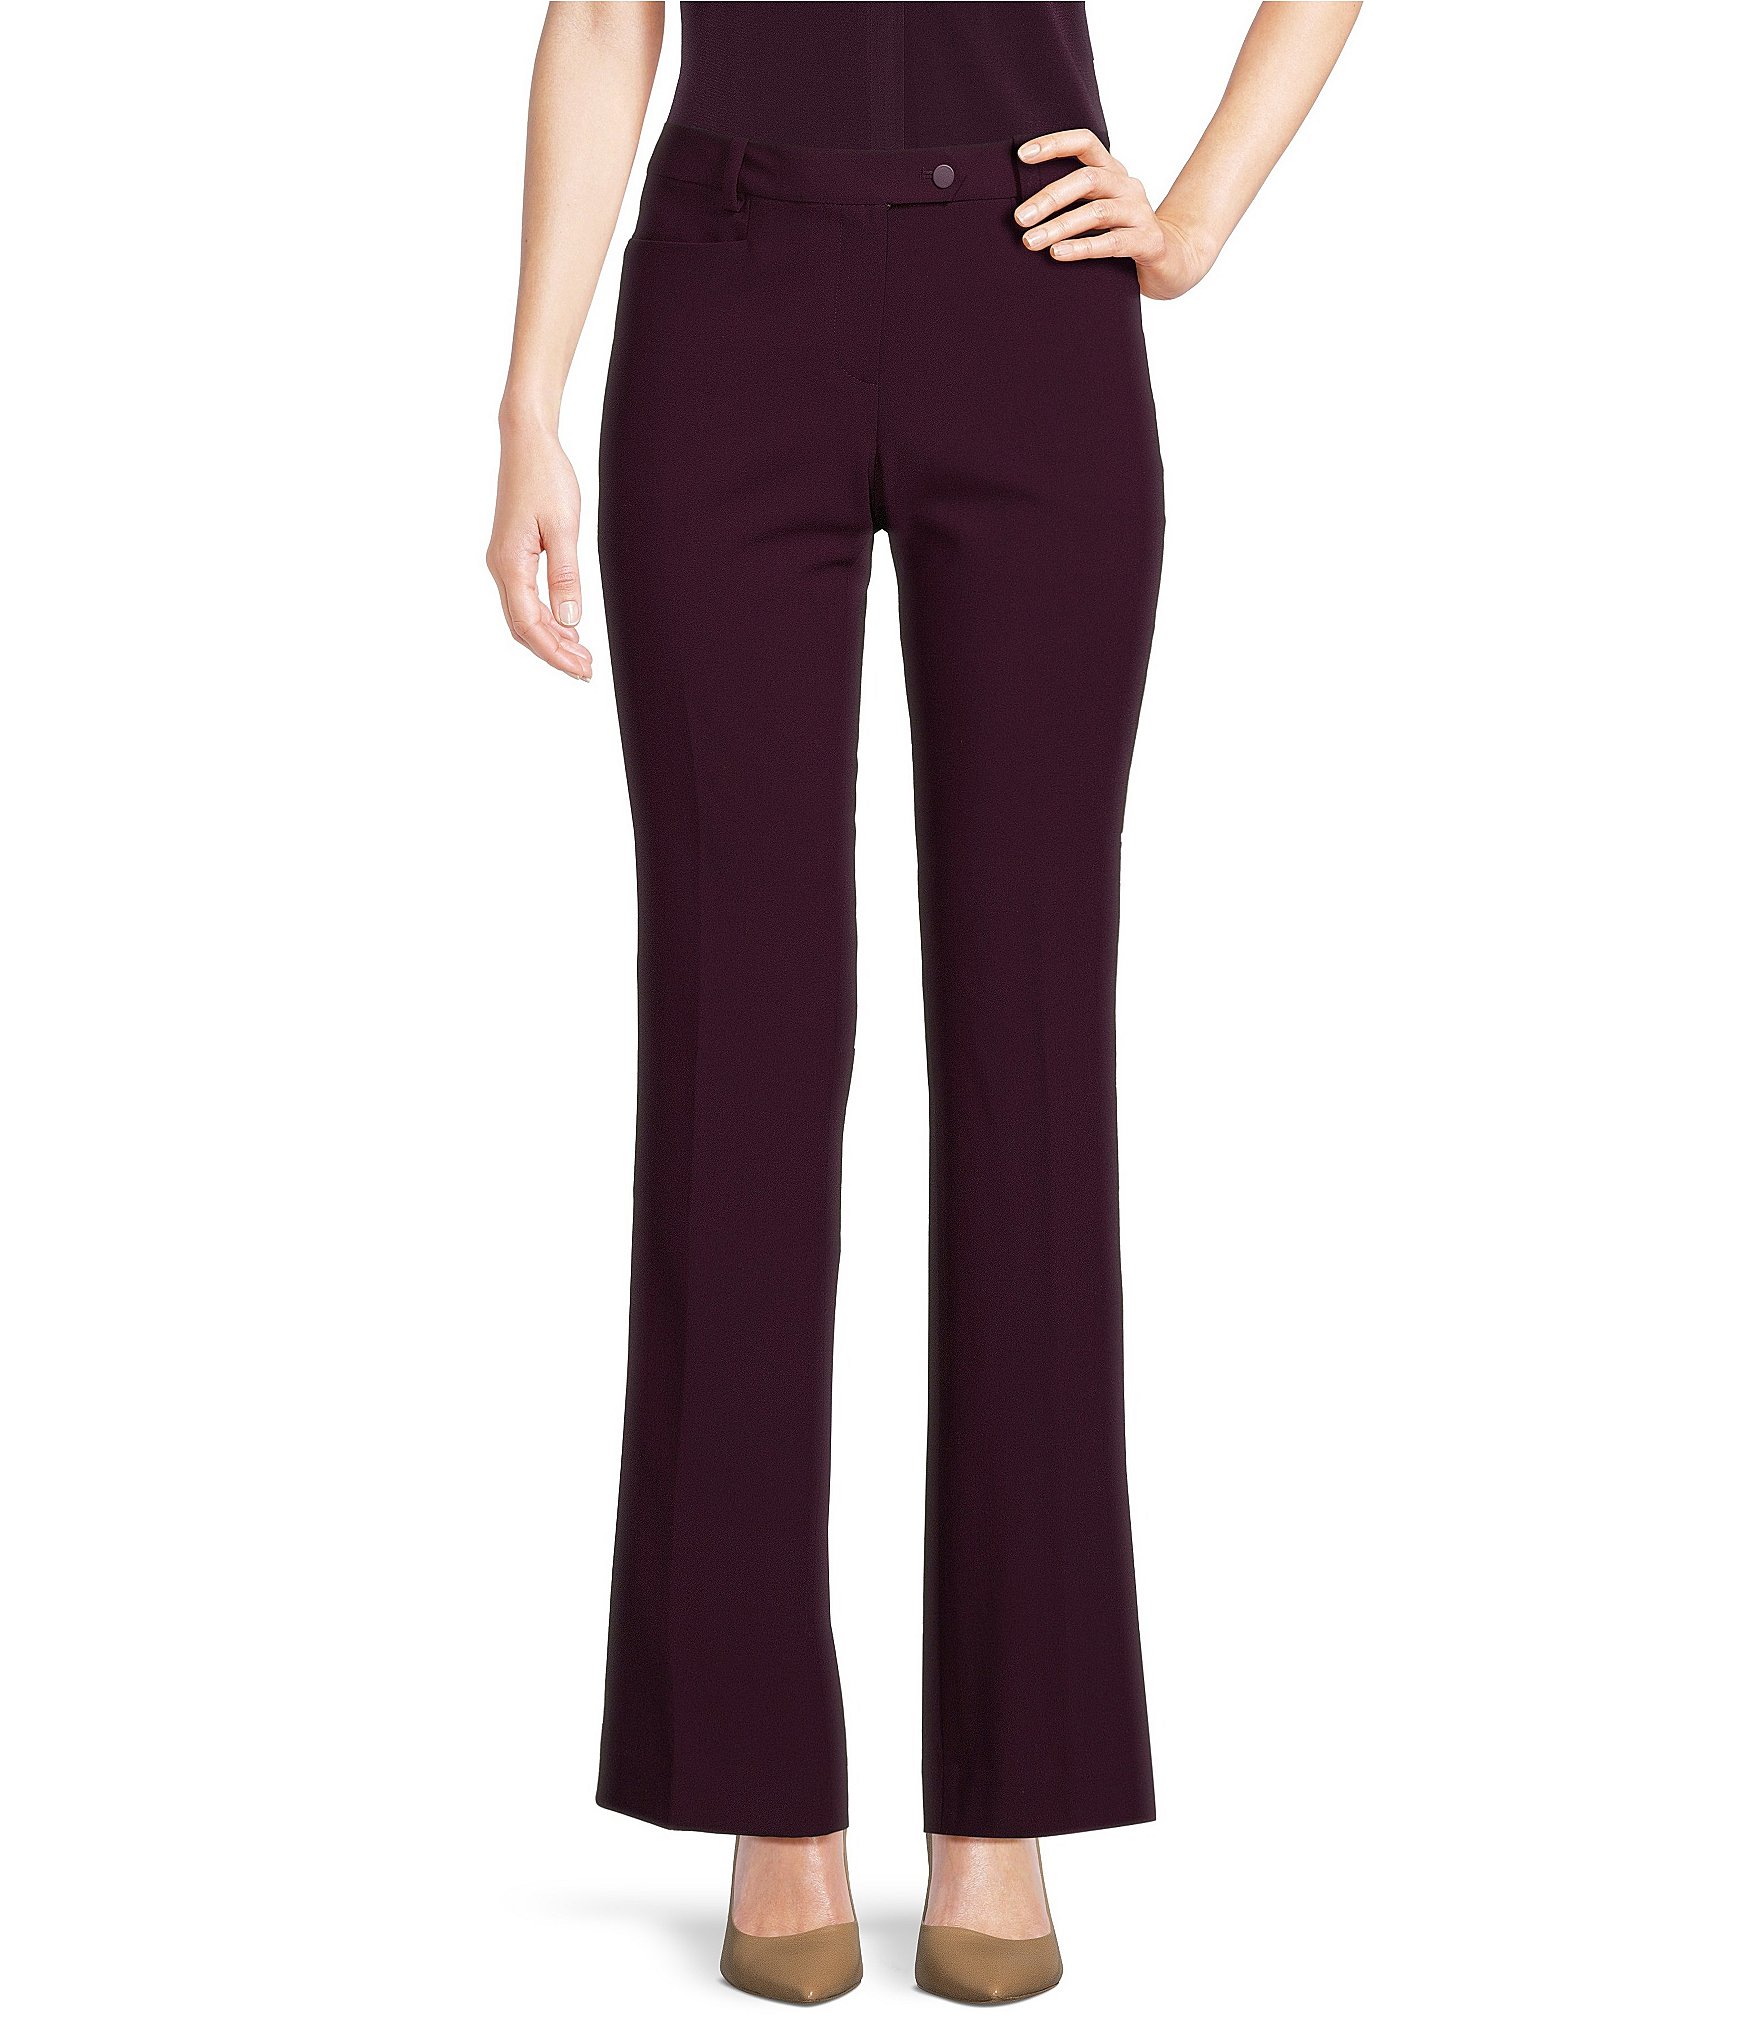 Slim Factor by Investments No Waist Kick Flare Ponte Knit Pants